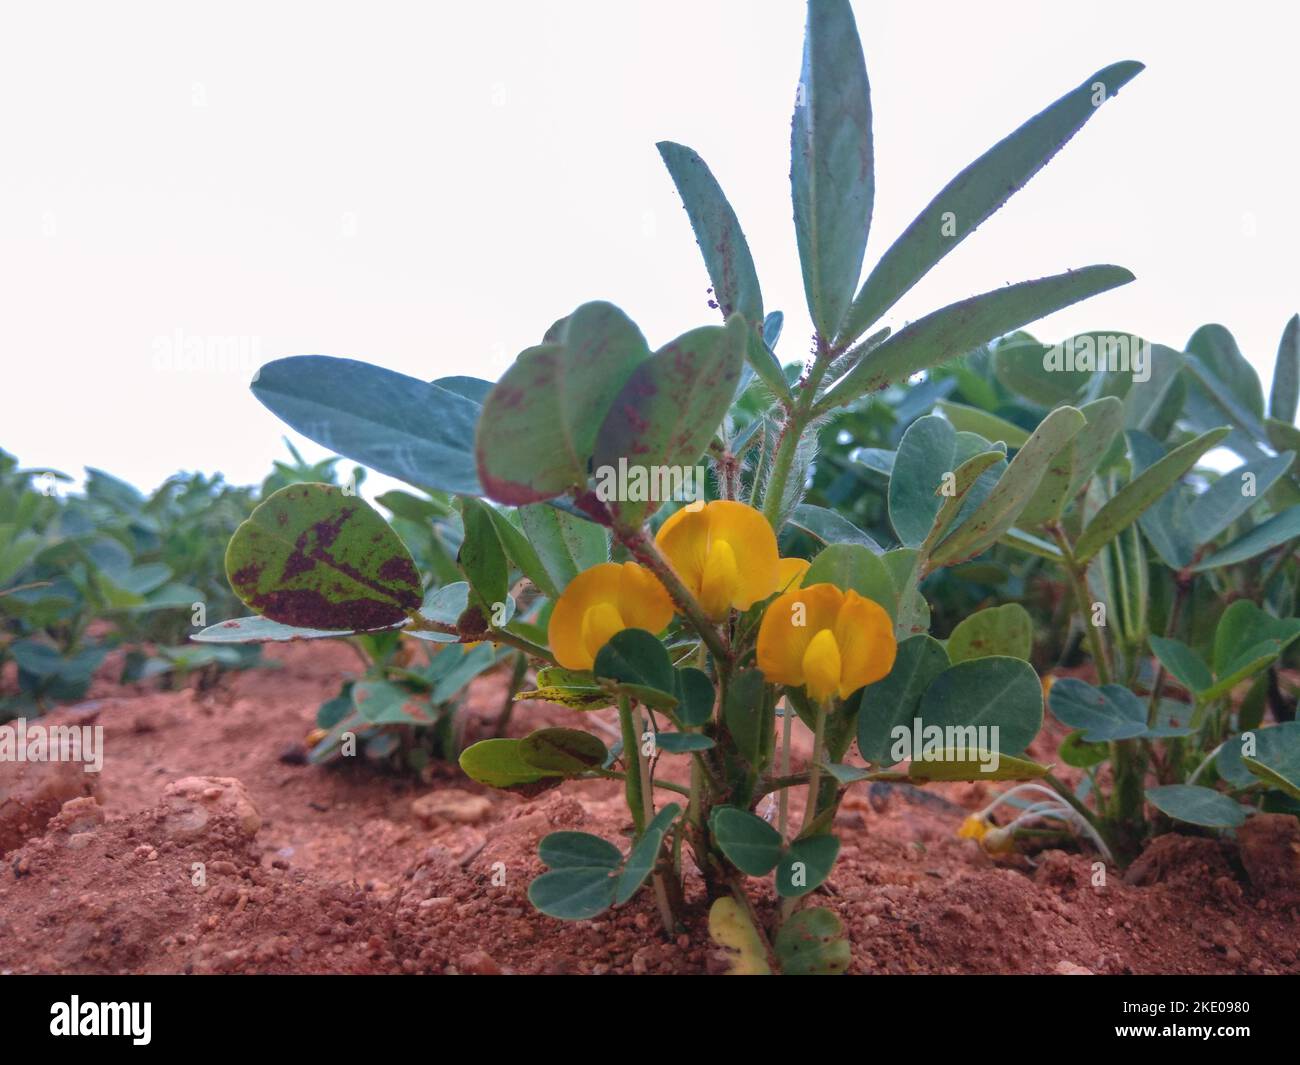 A close-up shot from a low angle capturing flowering peanut plants on a plantation. Stock Photo